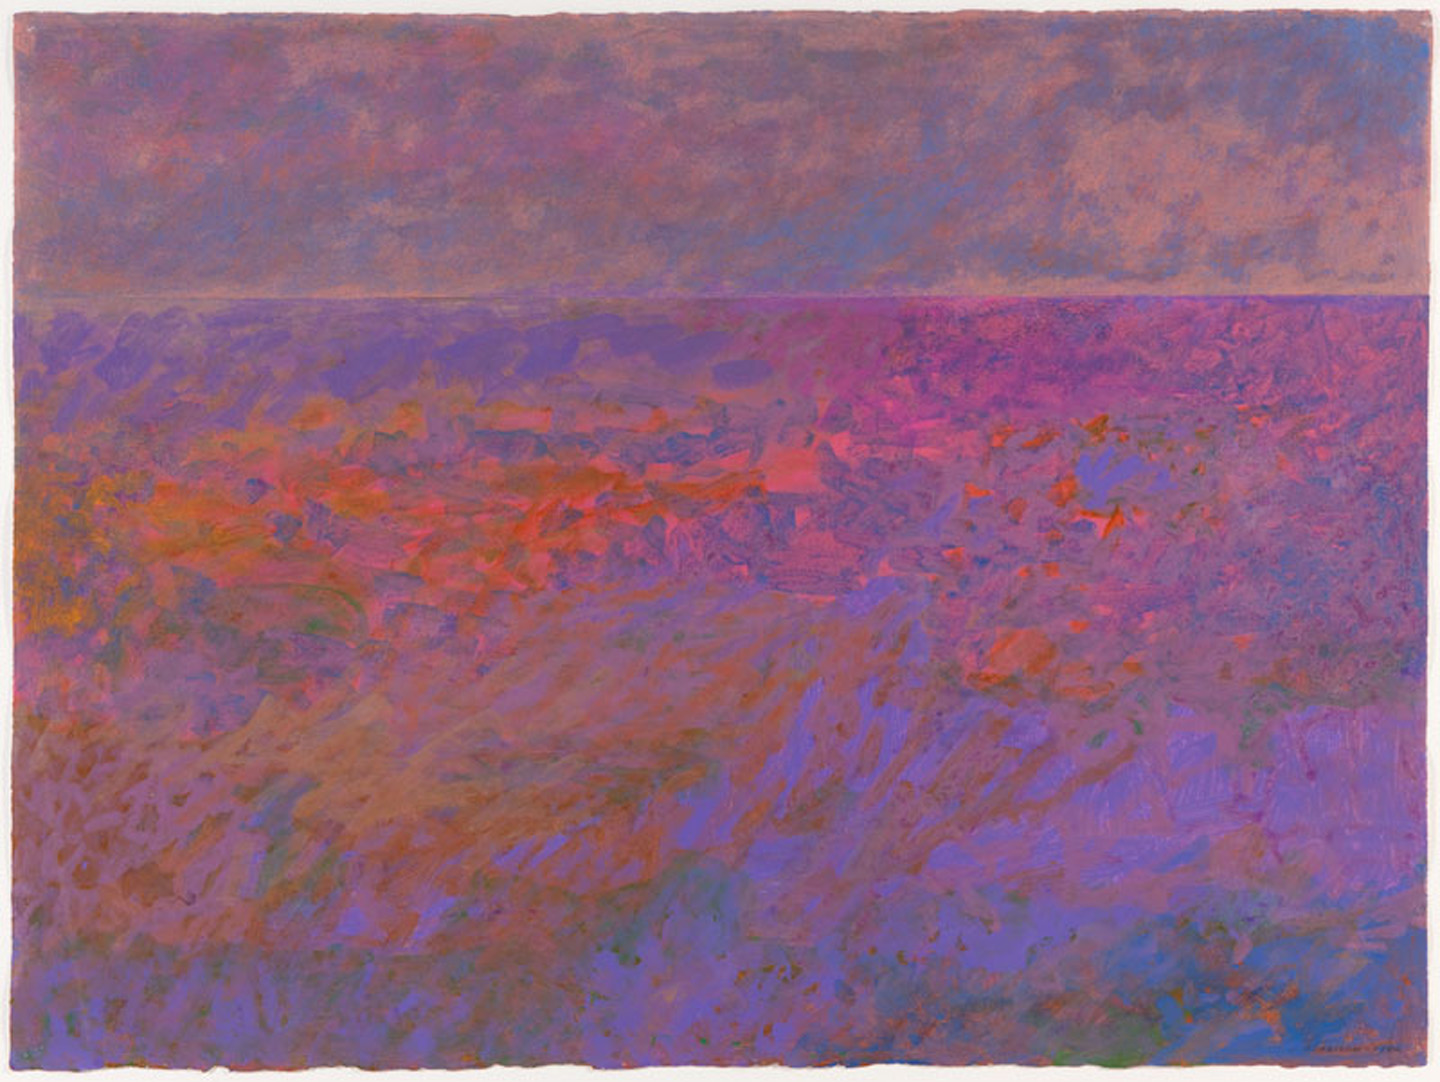 Lavender Wind, The Beyond, Red Rock Variation: Lake Superior Landscape, 1990
acrylic and pastel on paper
22.4 x 30 inches
Collection Minnesota Museum of American Art